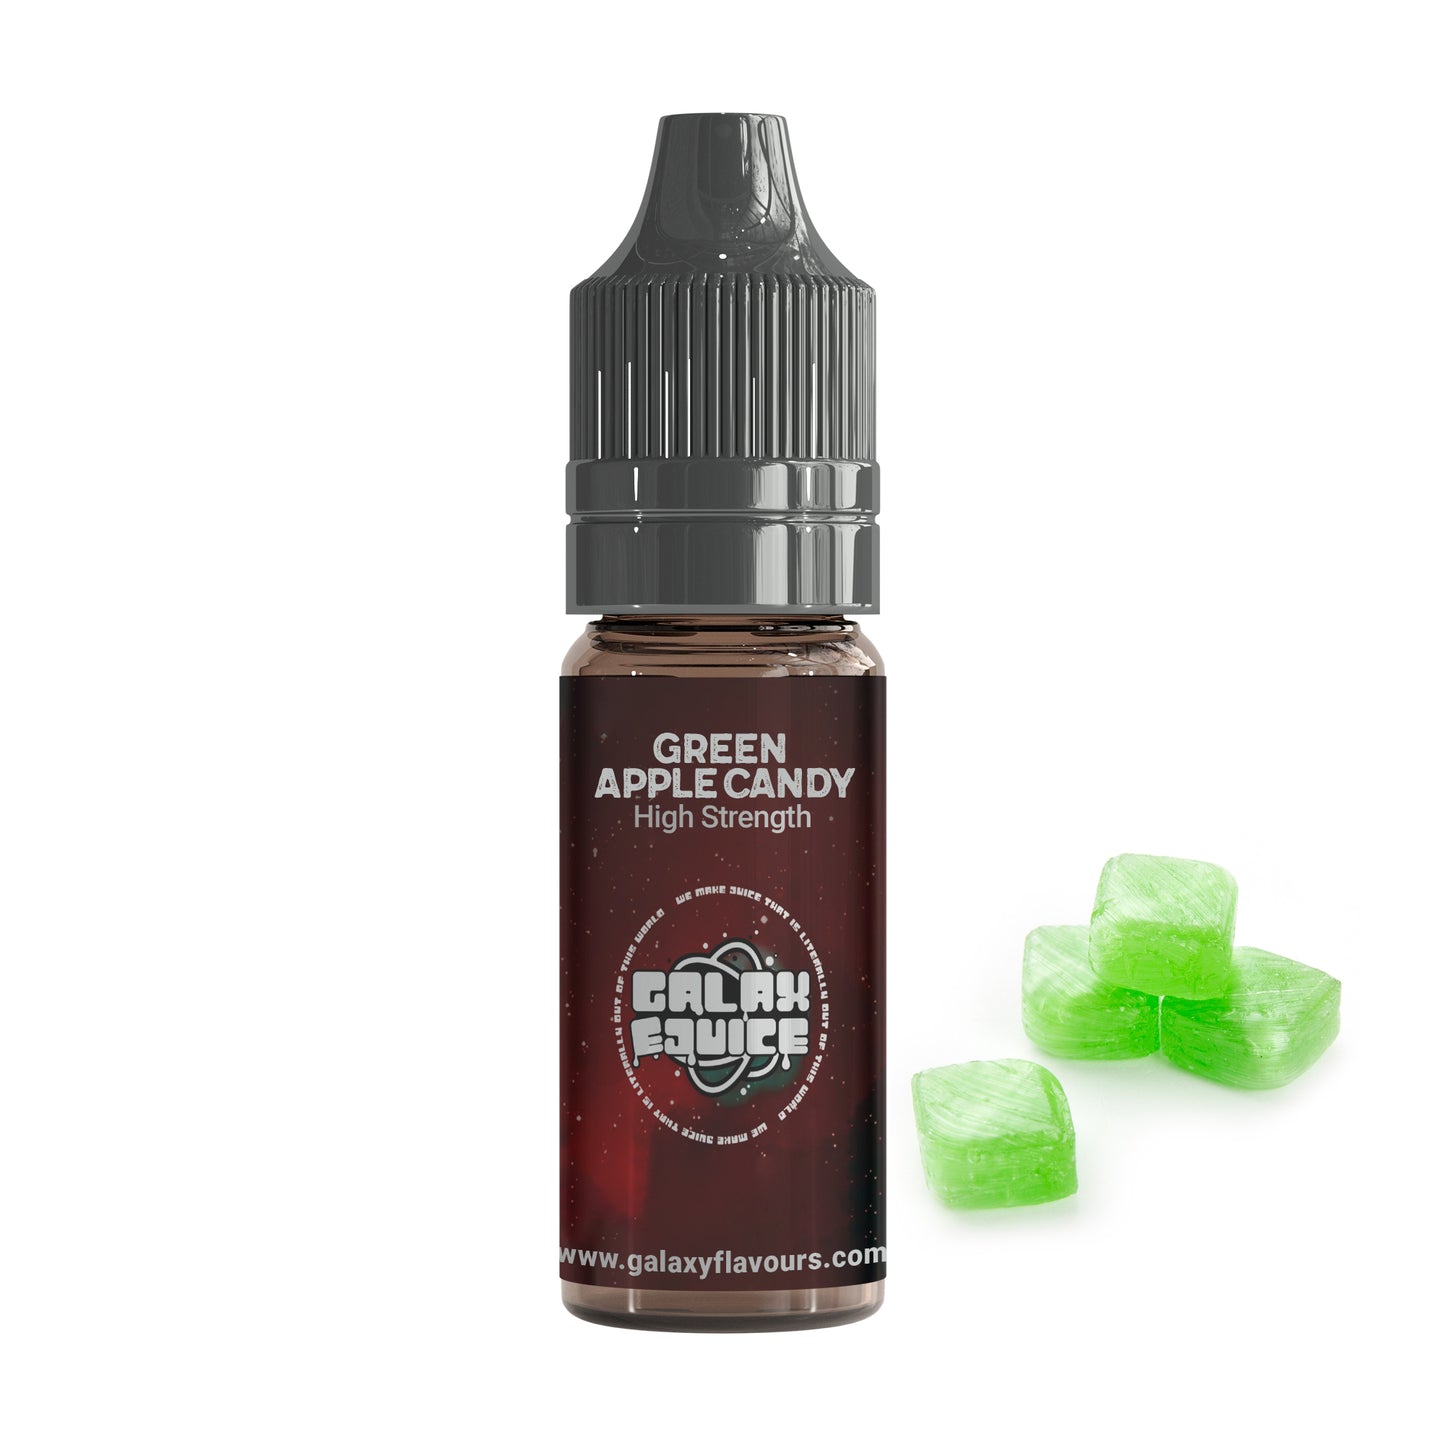 Green Apple Hard Candy High Strength Professional Flavouring.